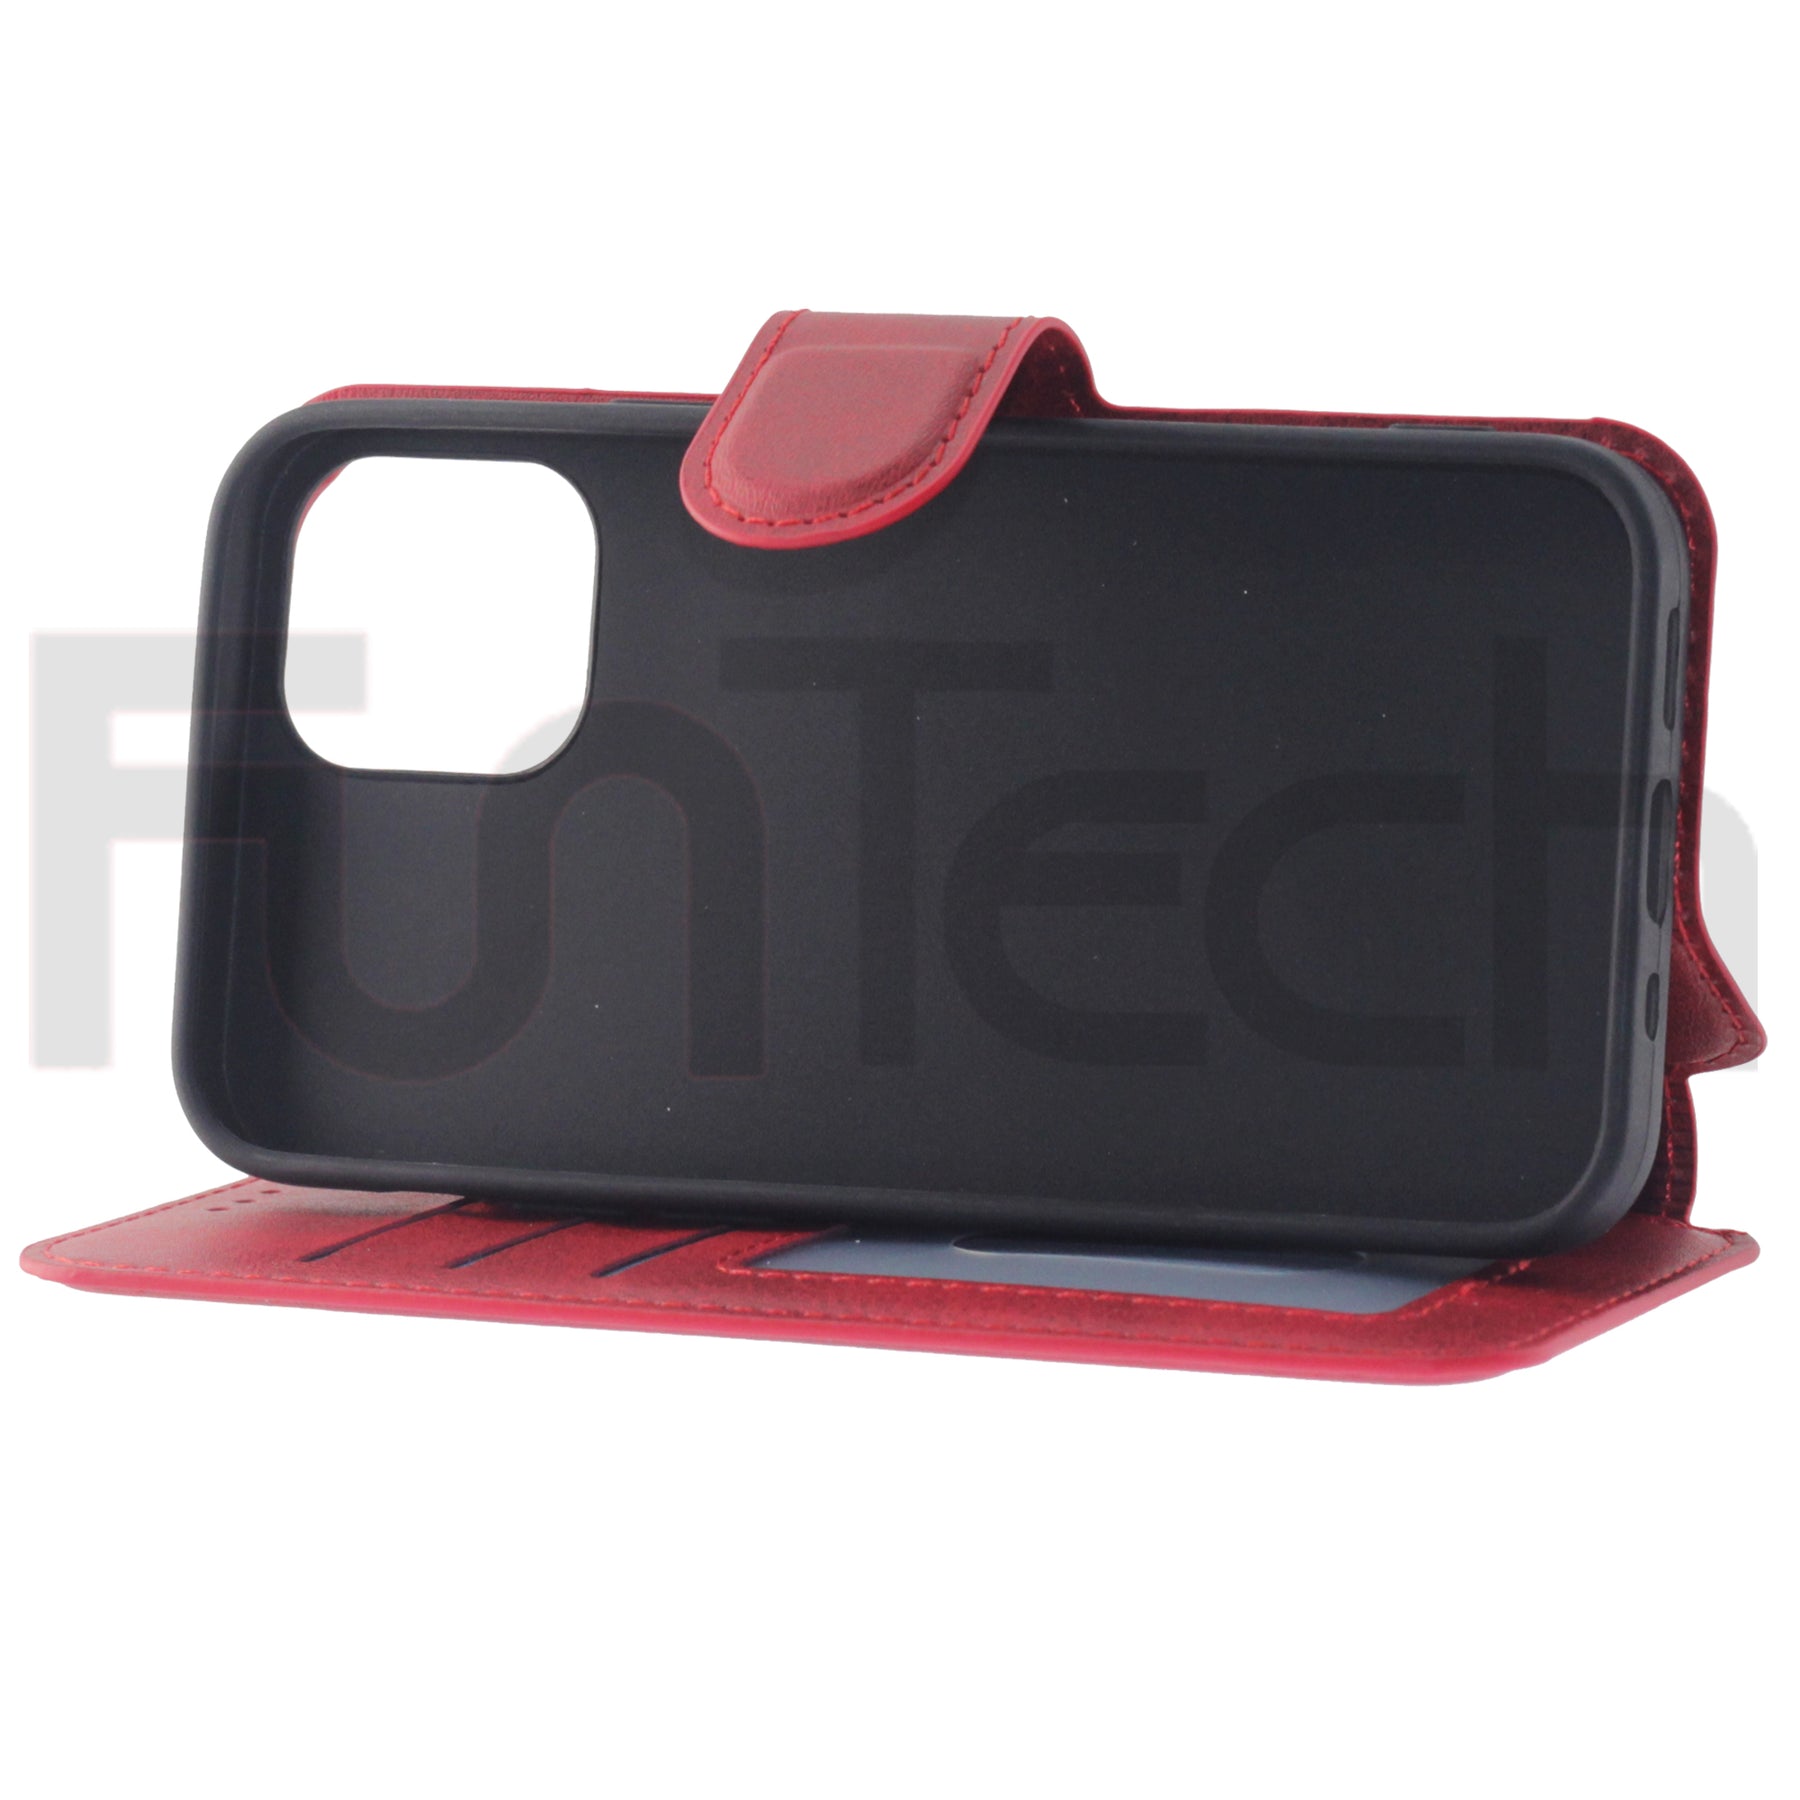 iPhone 12 Mini, Leather Wallet Case, Color Red.